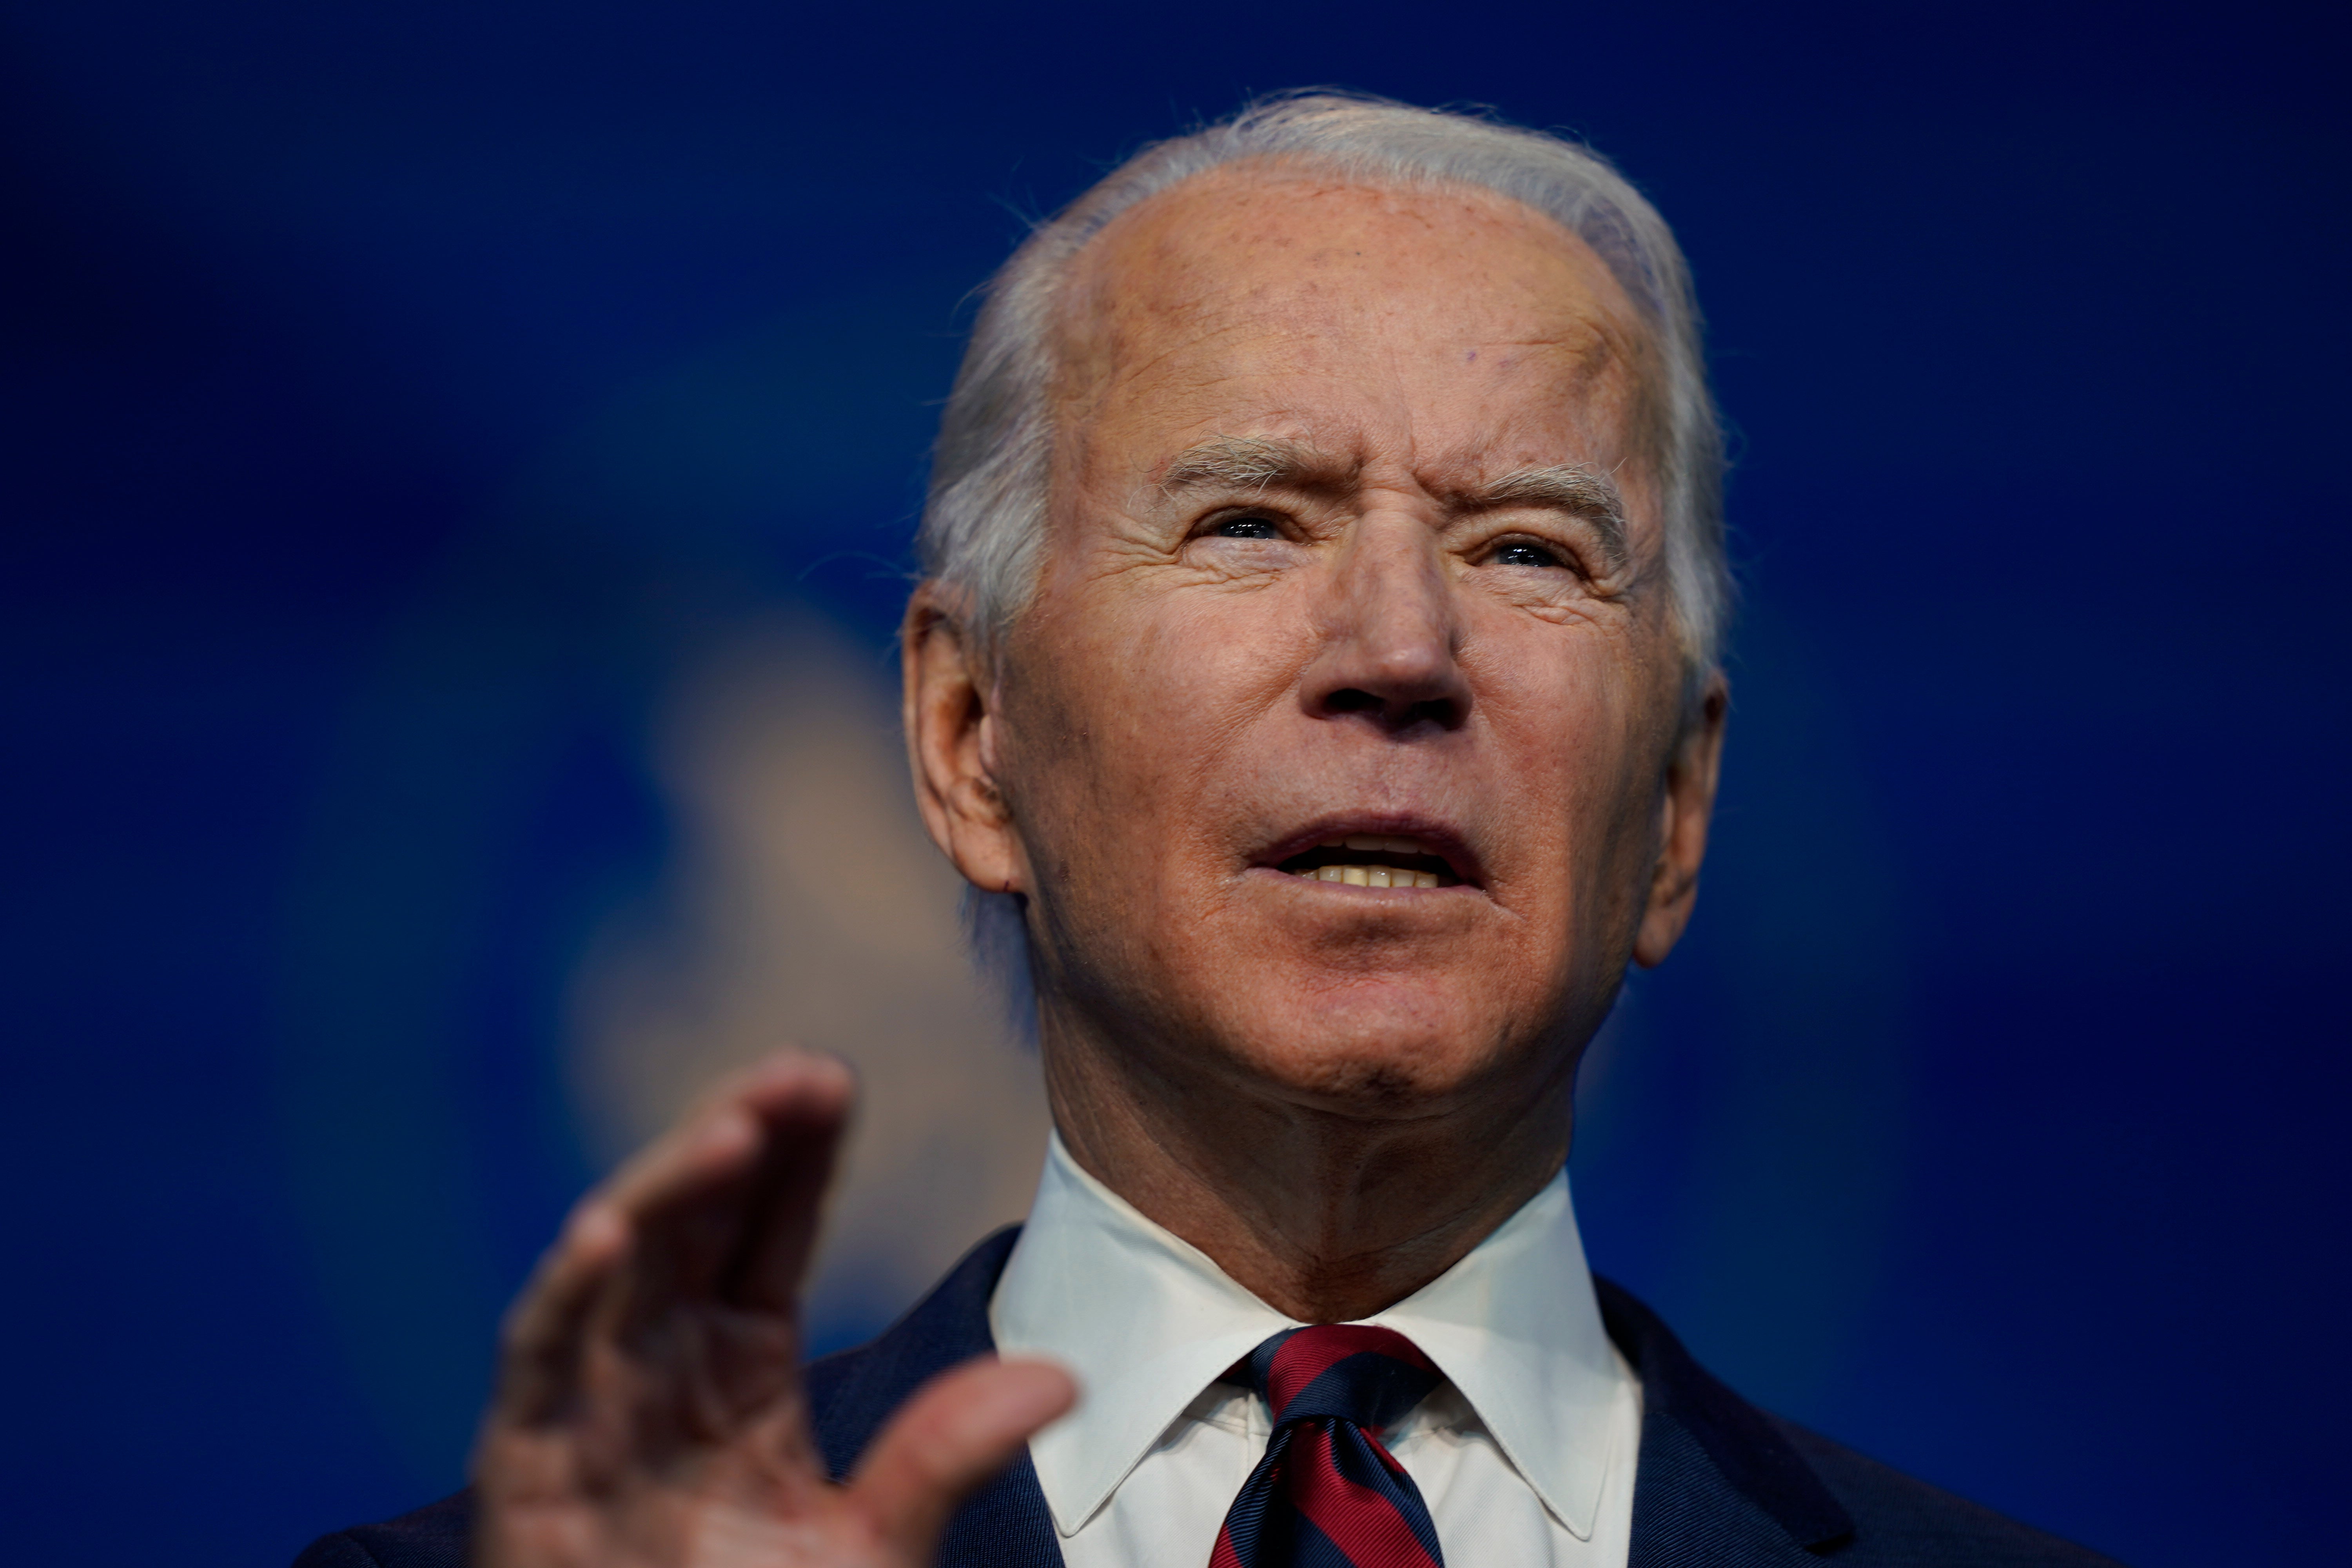 ‘Our work is far from over’ Joe Biden said of the stimulus package